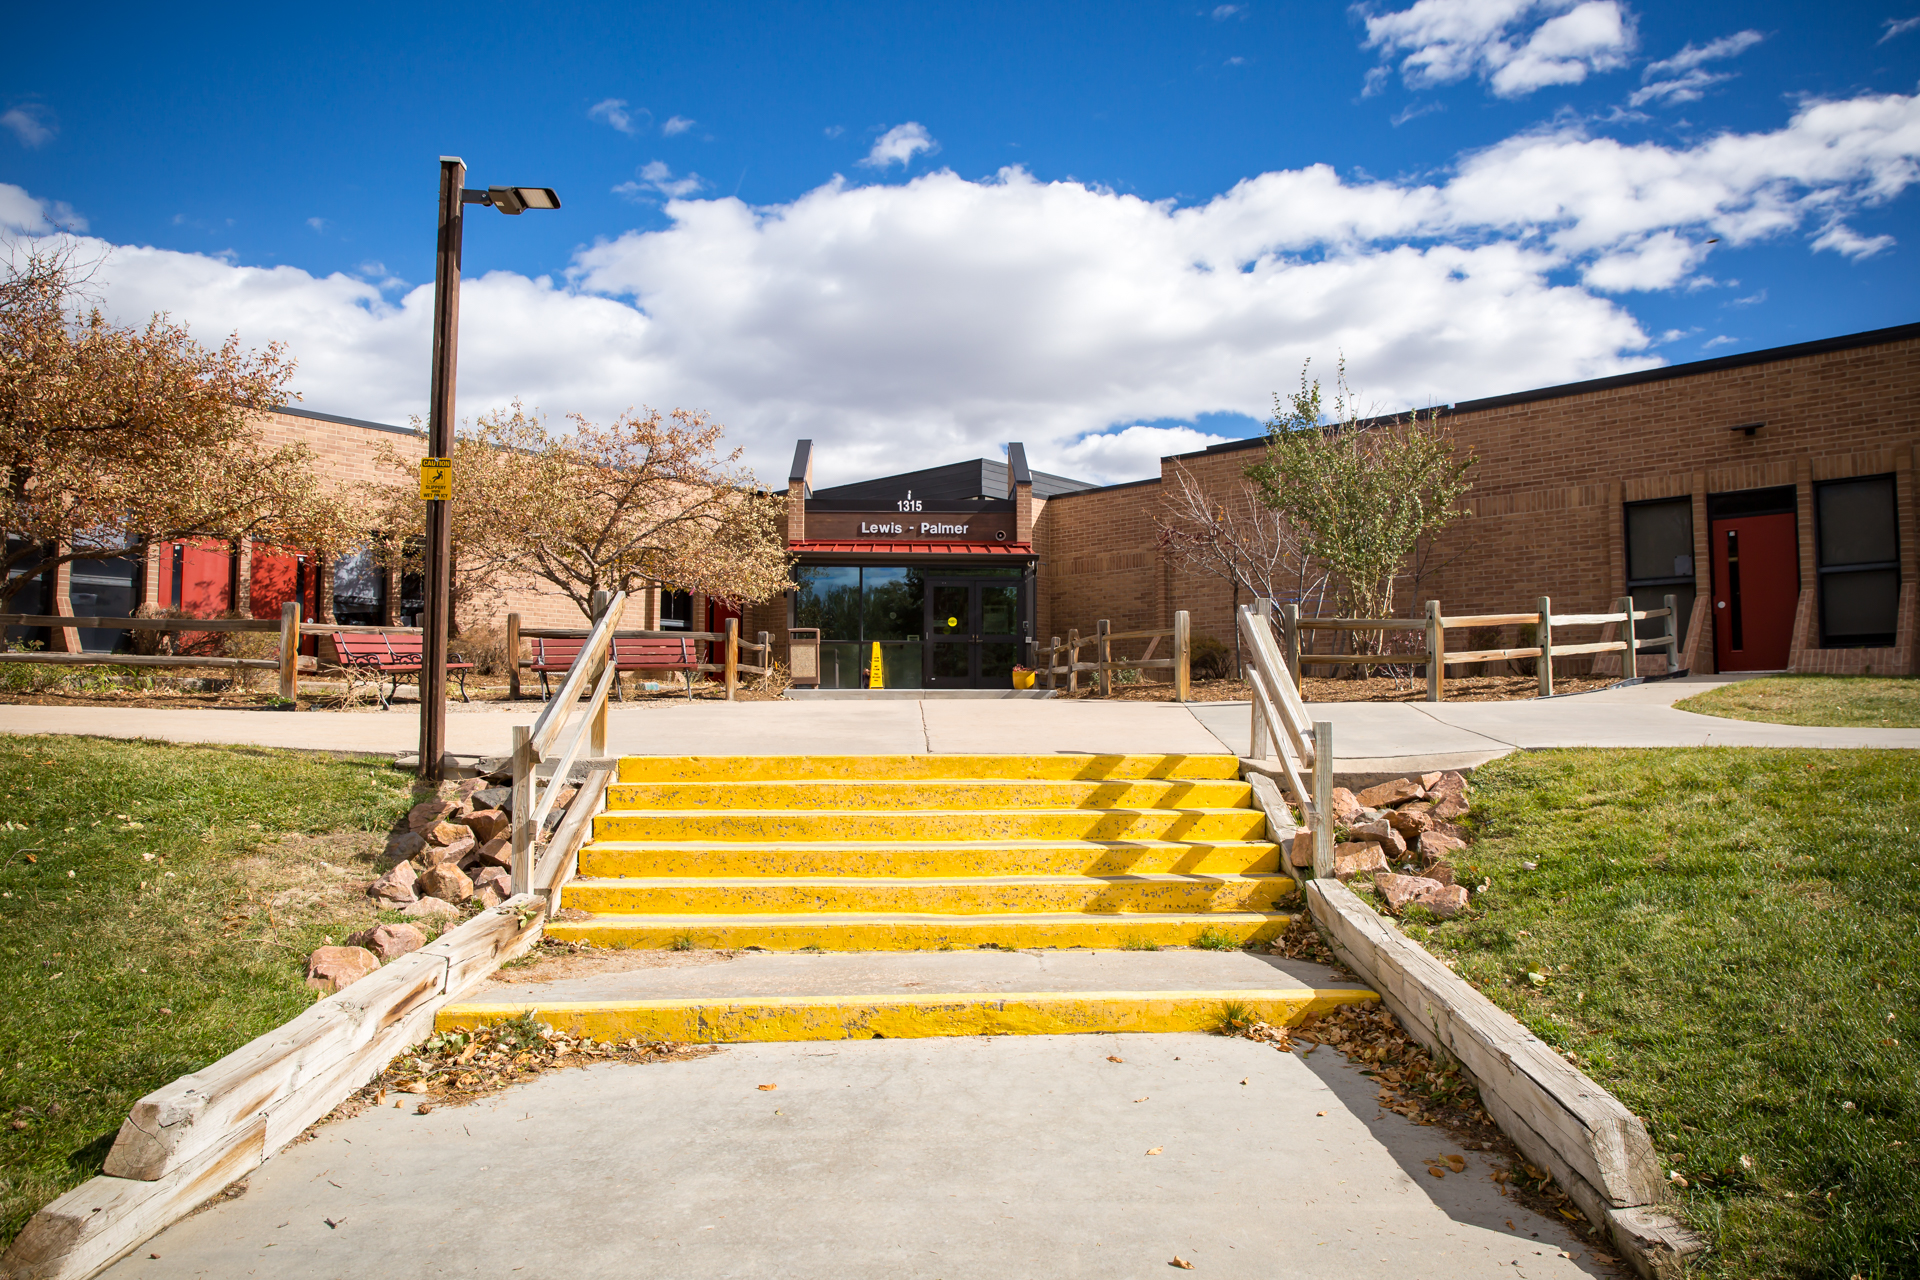 lewis-palmer elementary school in the summer